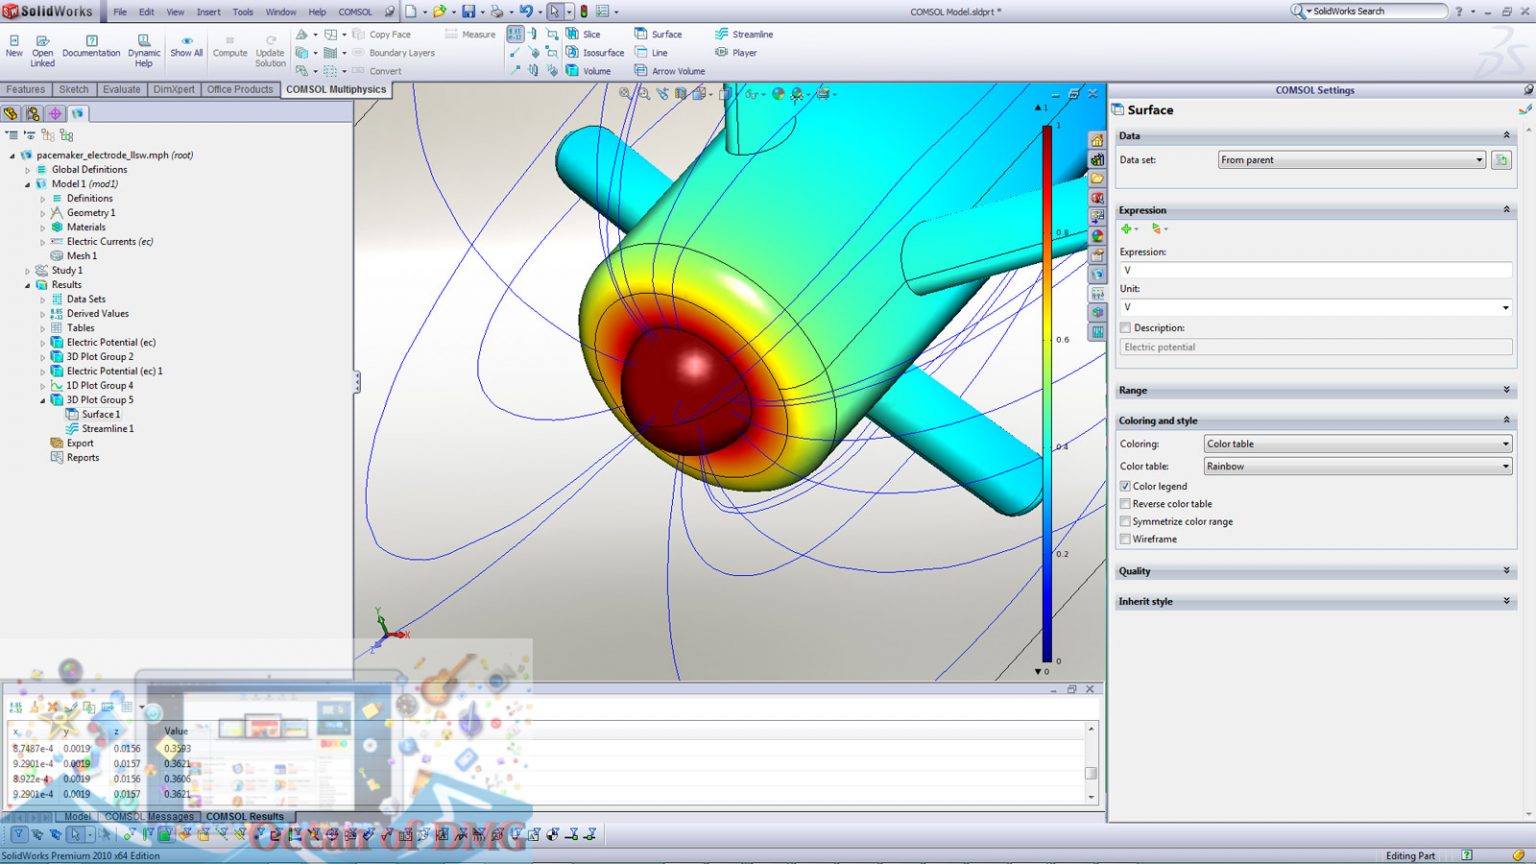 comsol for mac free download